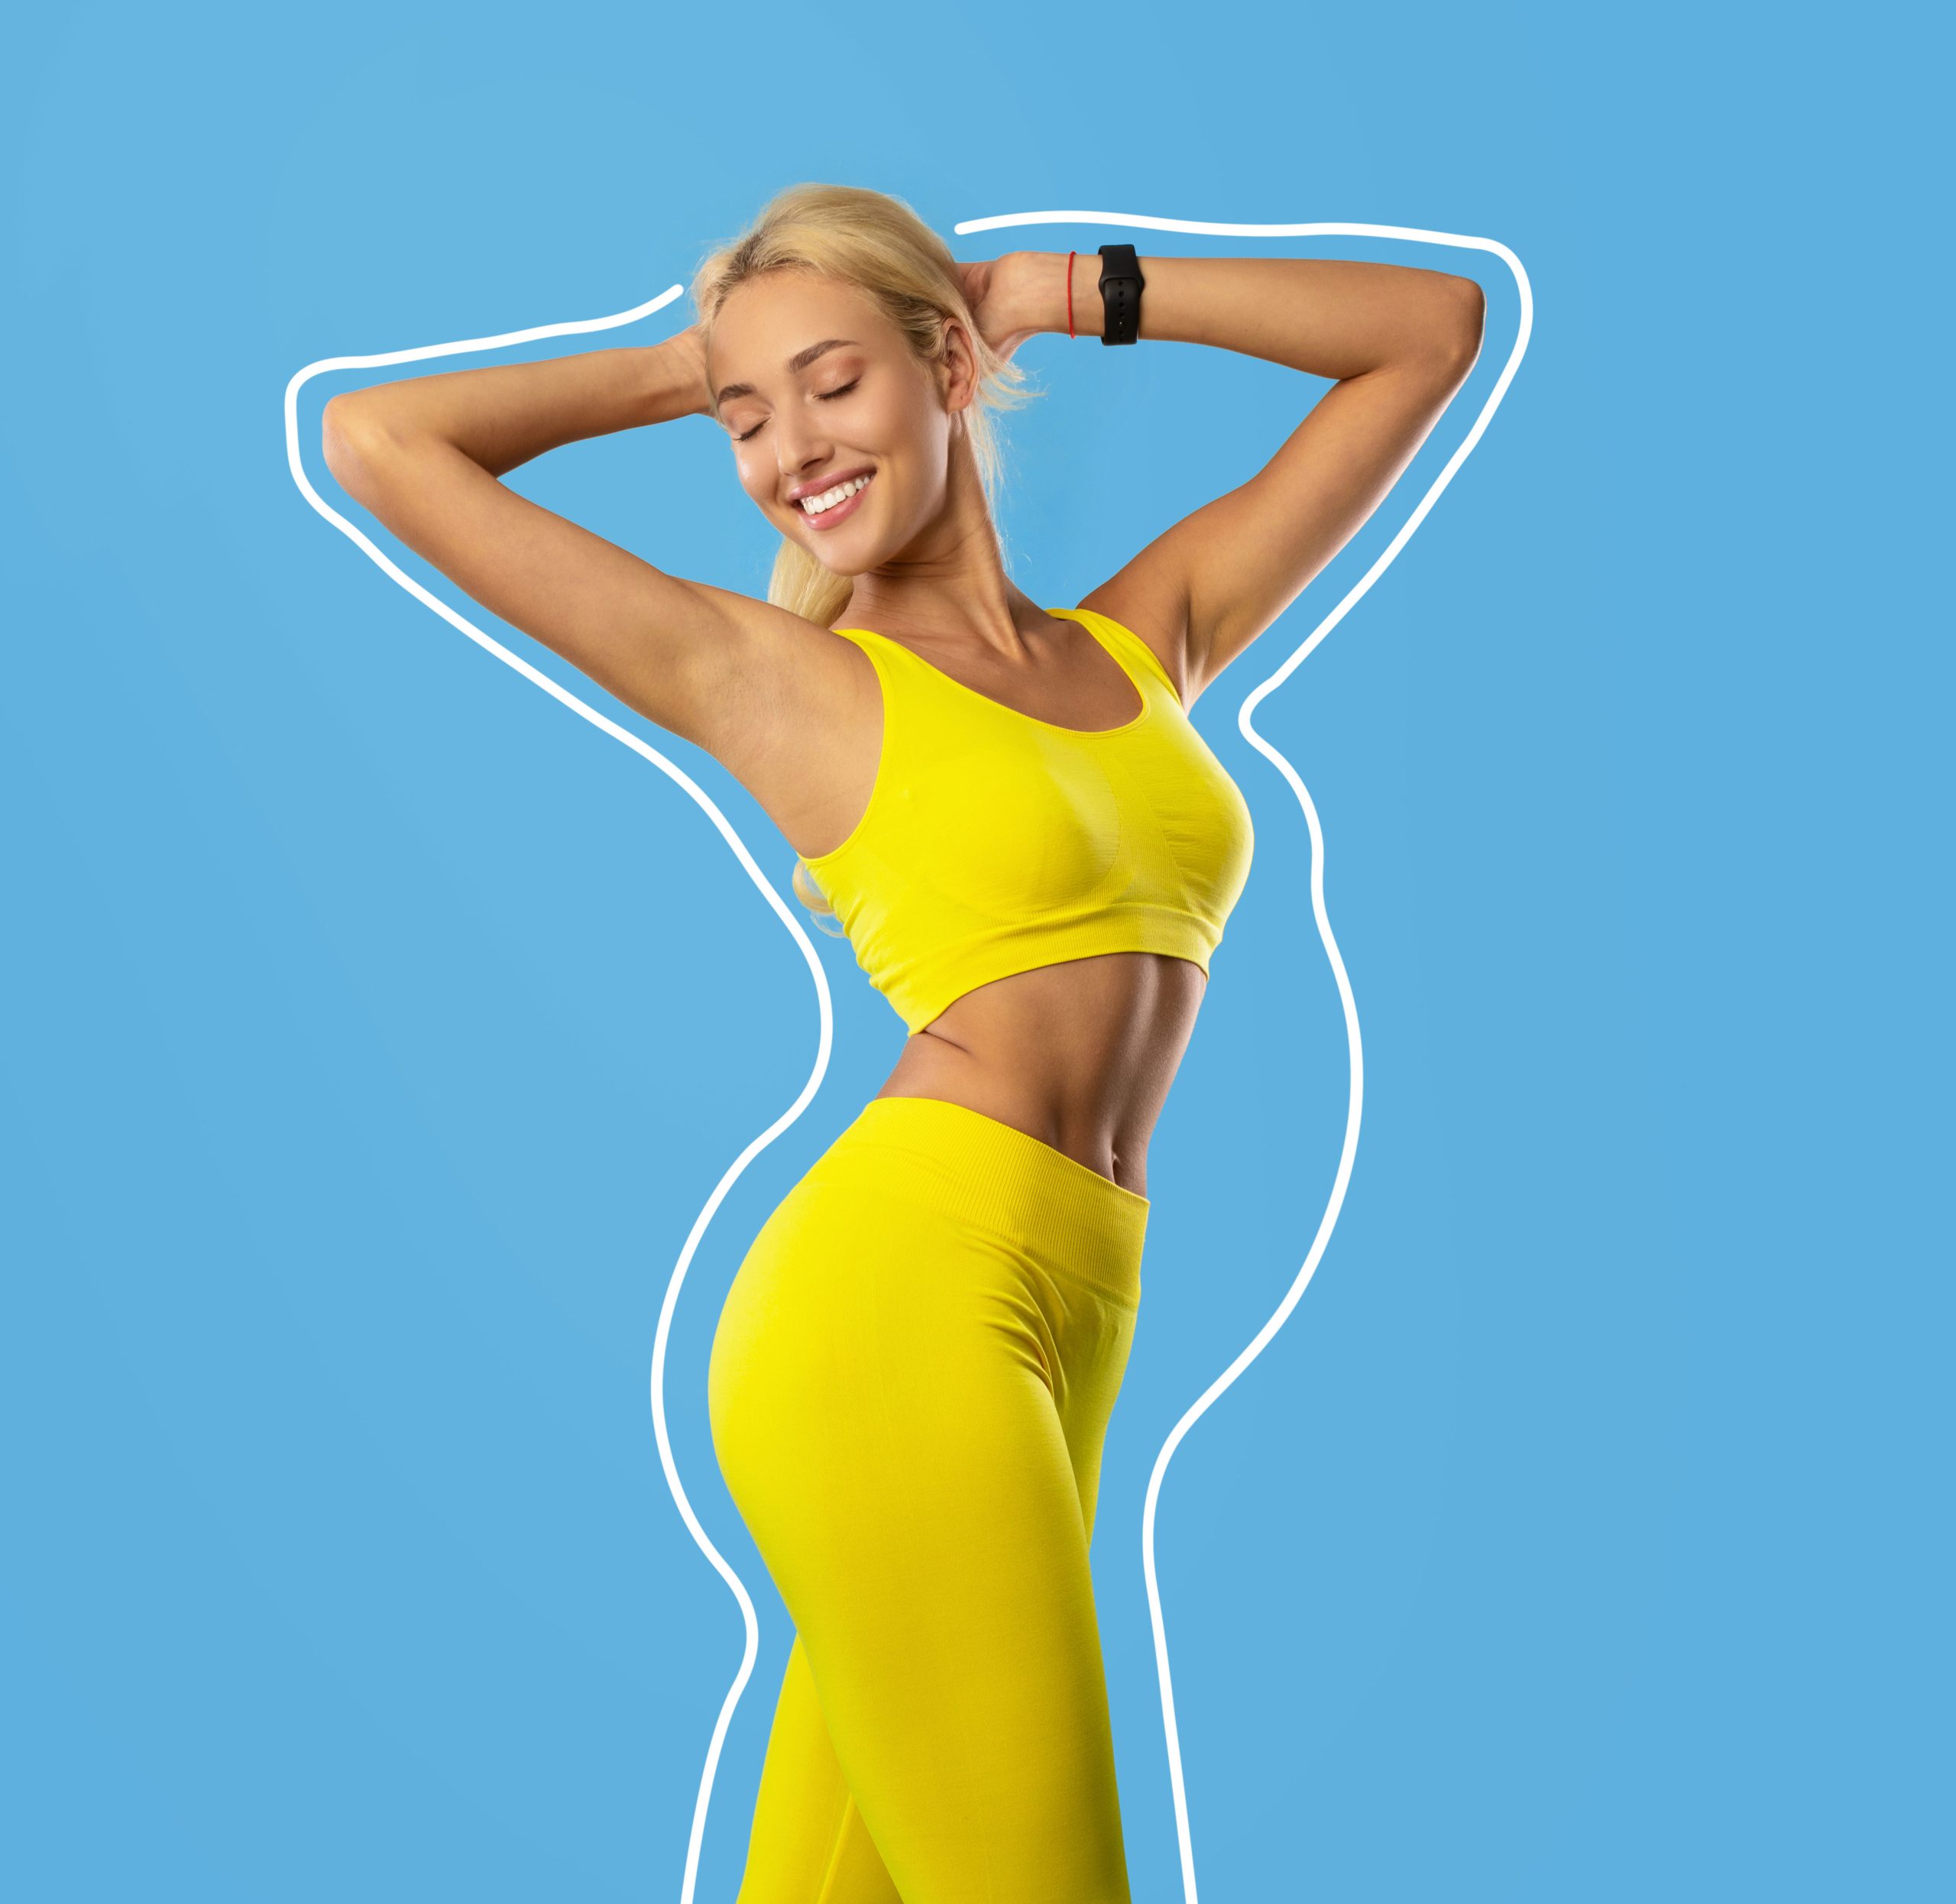 https://www.ersuntopal.com/wp-content/uploads/2023/09/young-woman-sportswear-demonstrating-slim-body-blue-background-collage-with-outlines-scaled.jpg